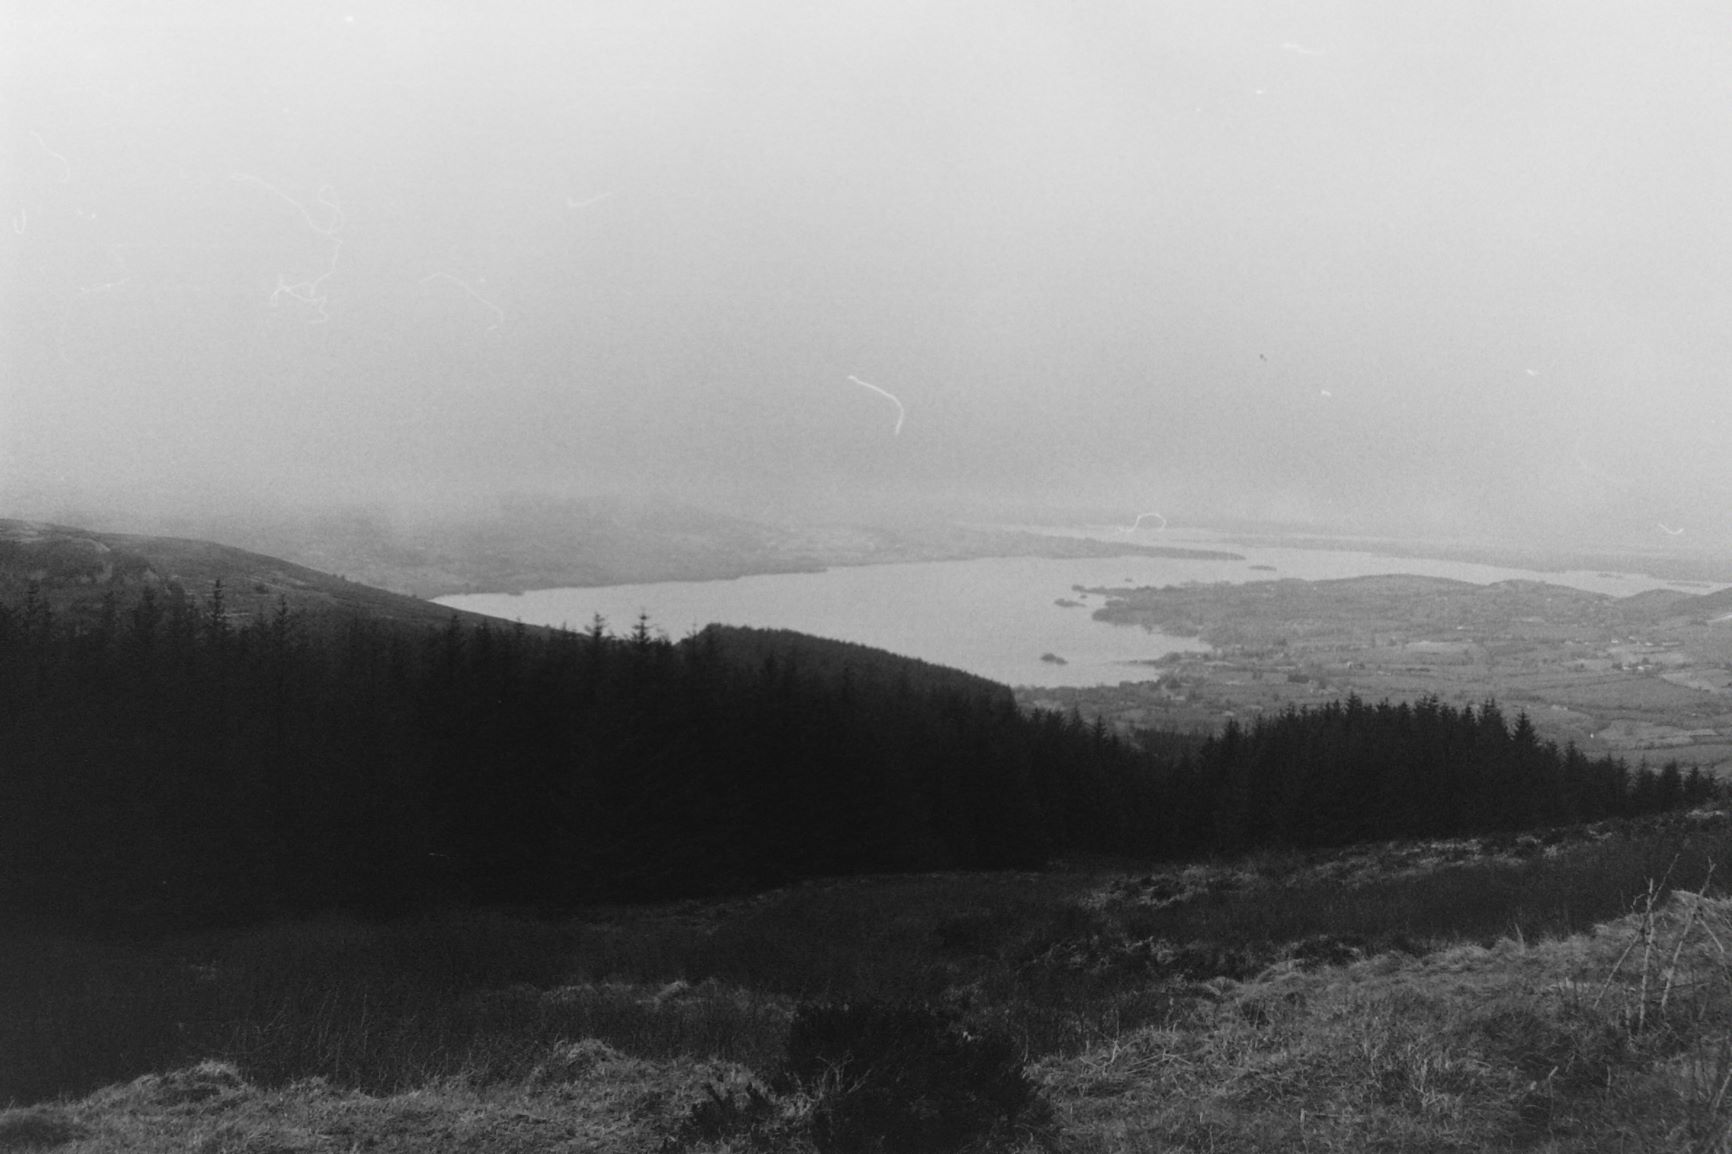 Partially clouded view of Lough Derg